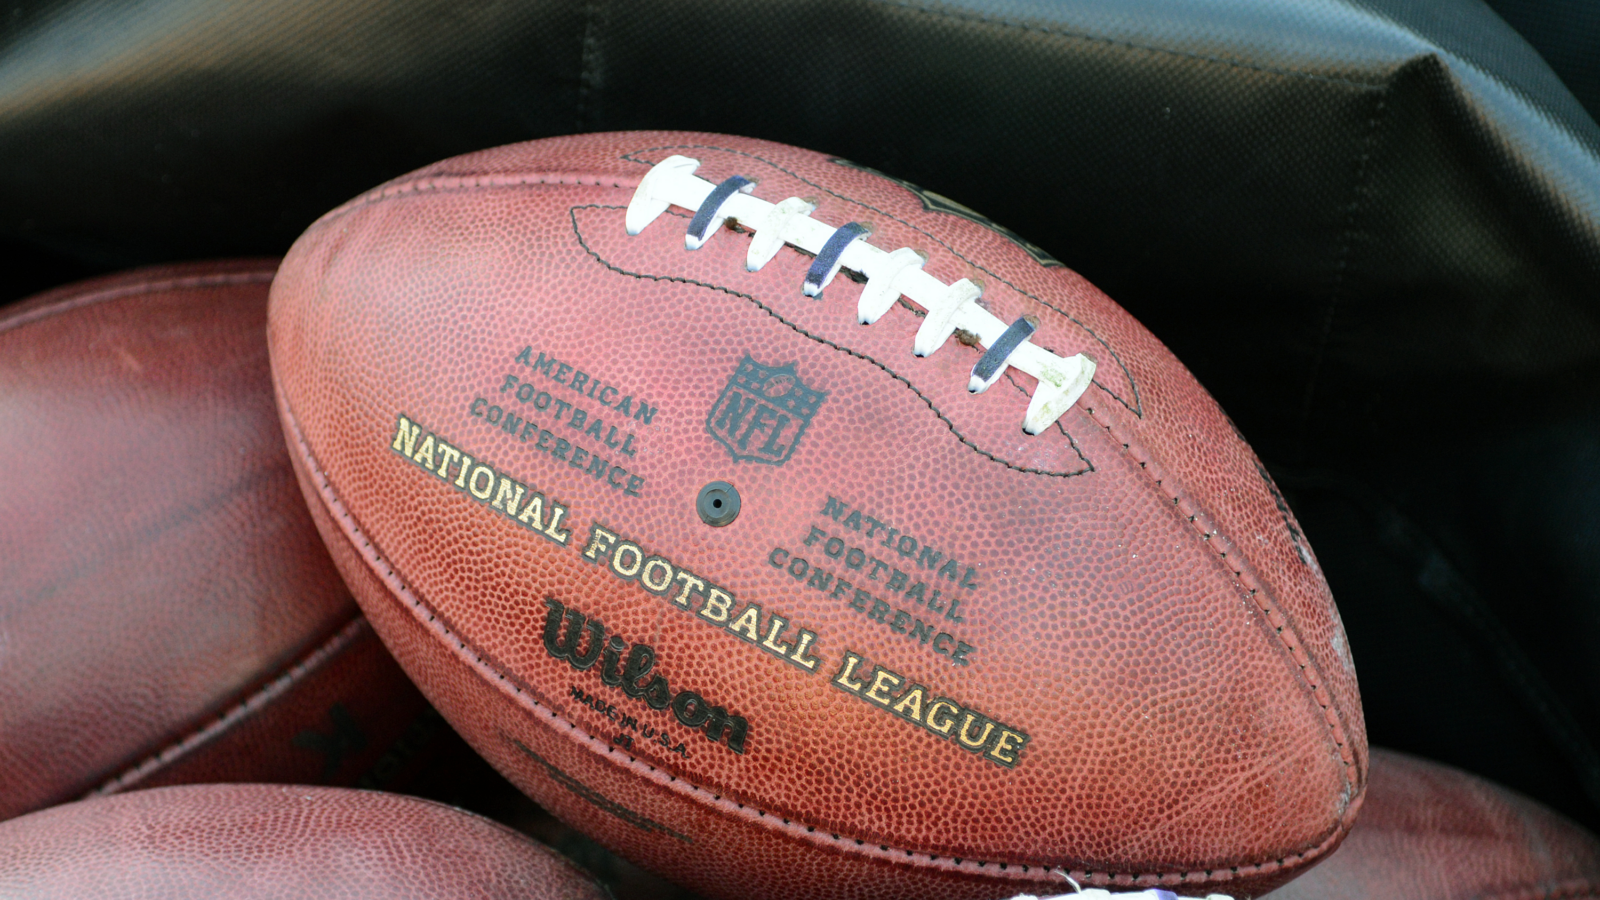 nfl game ball generic 